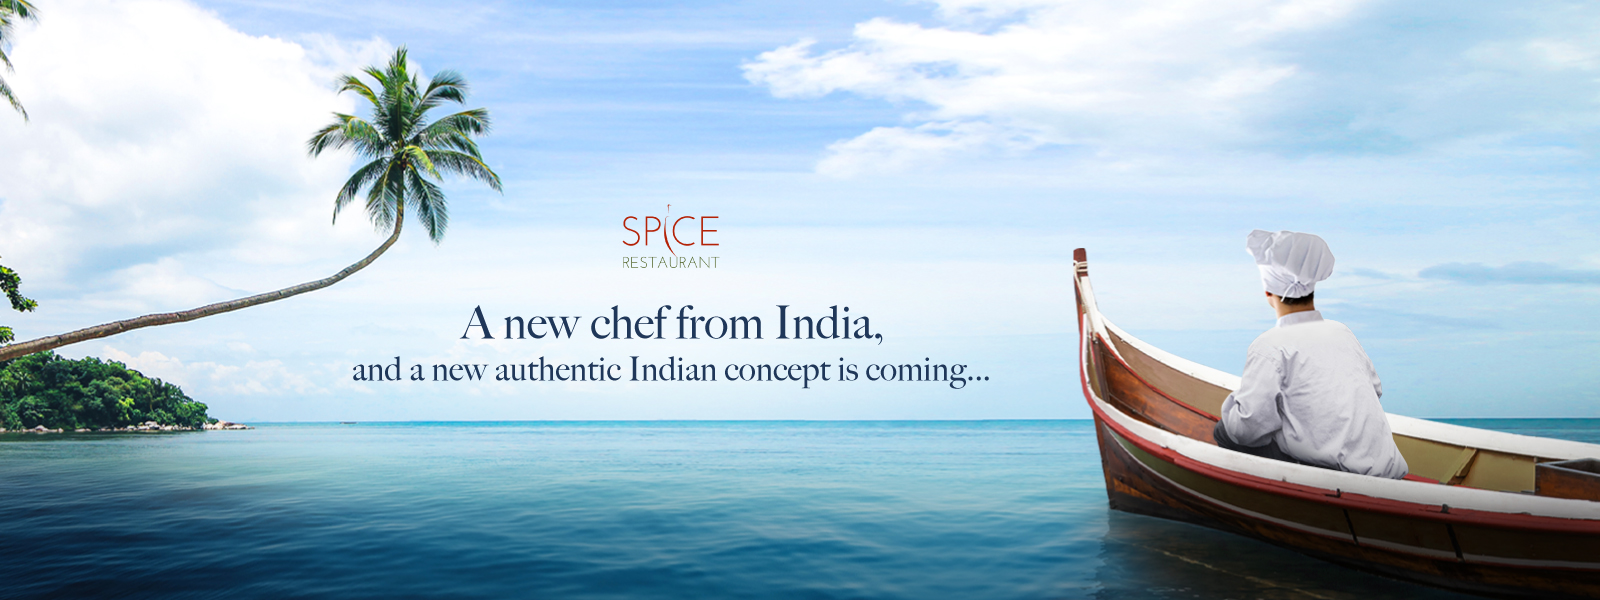 Spice Reopening Web Banner 03 